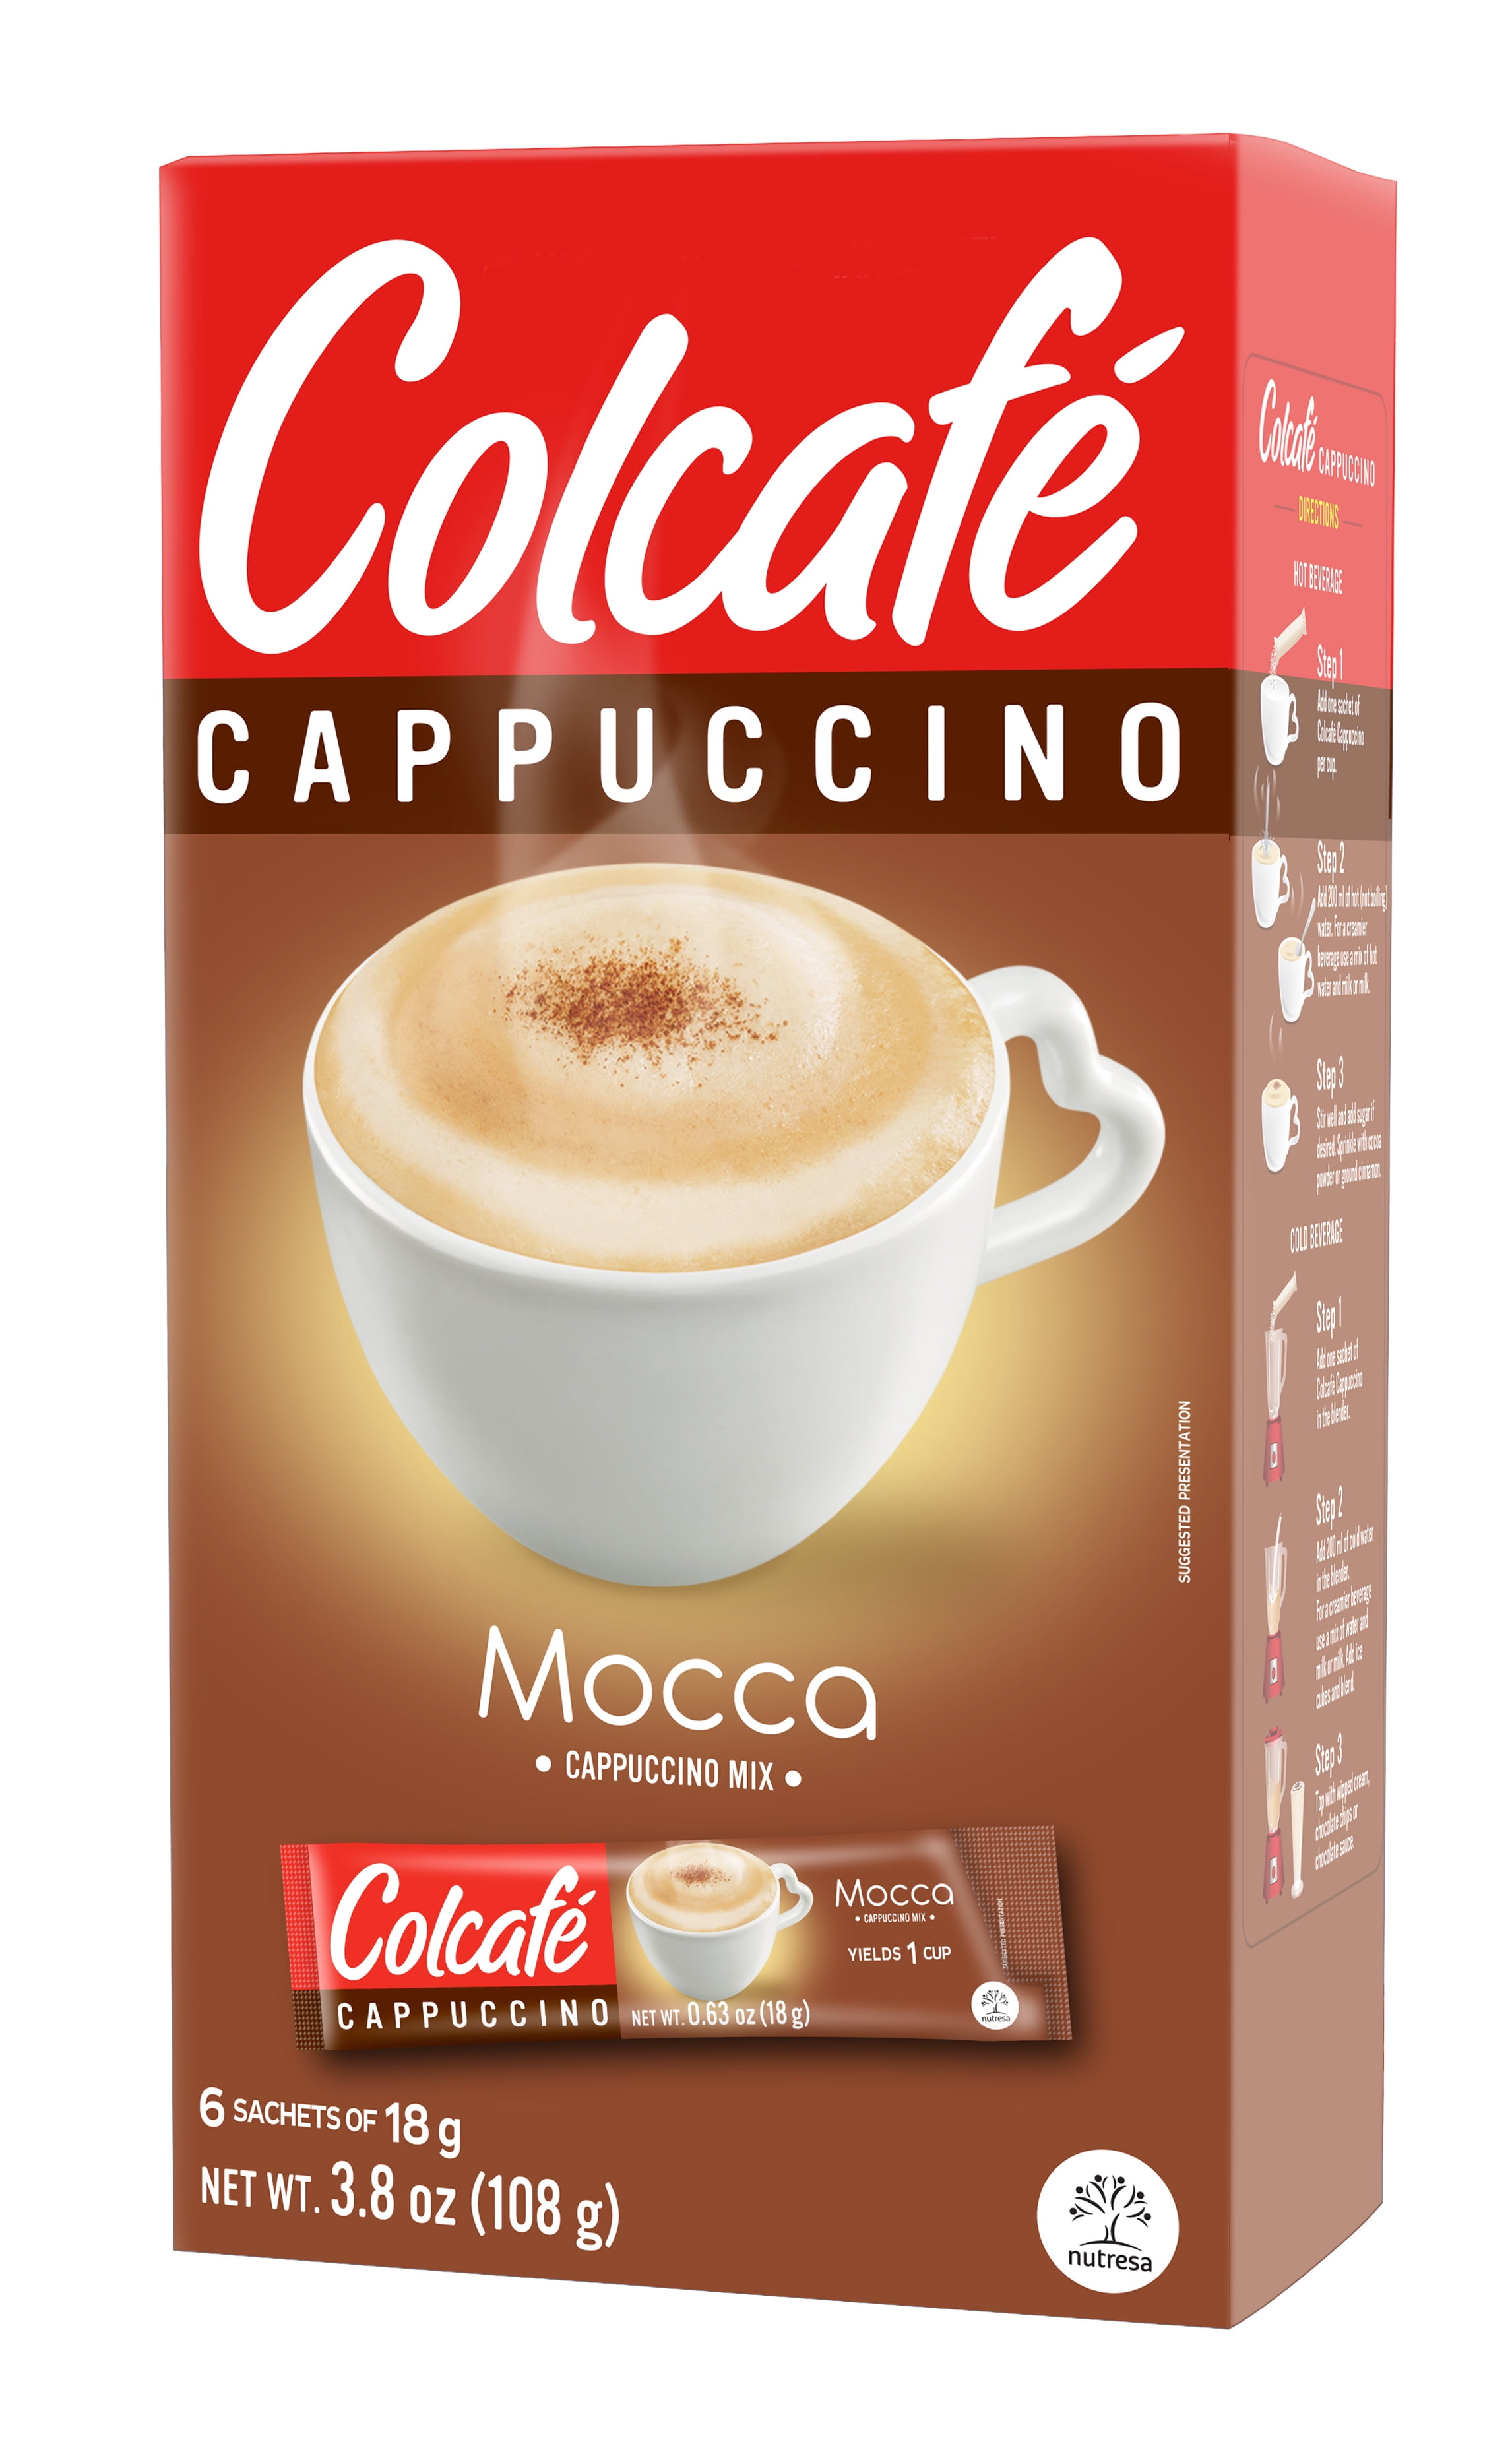 Colcafé Capuccino Mocca Box 3.8 oz, Pack of 2, Instant Coffee 